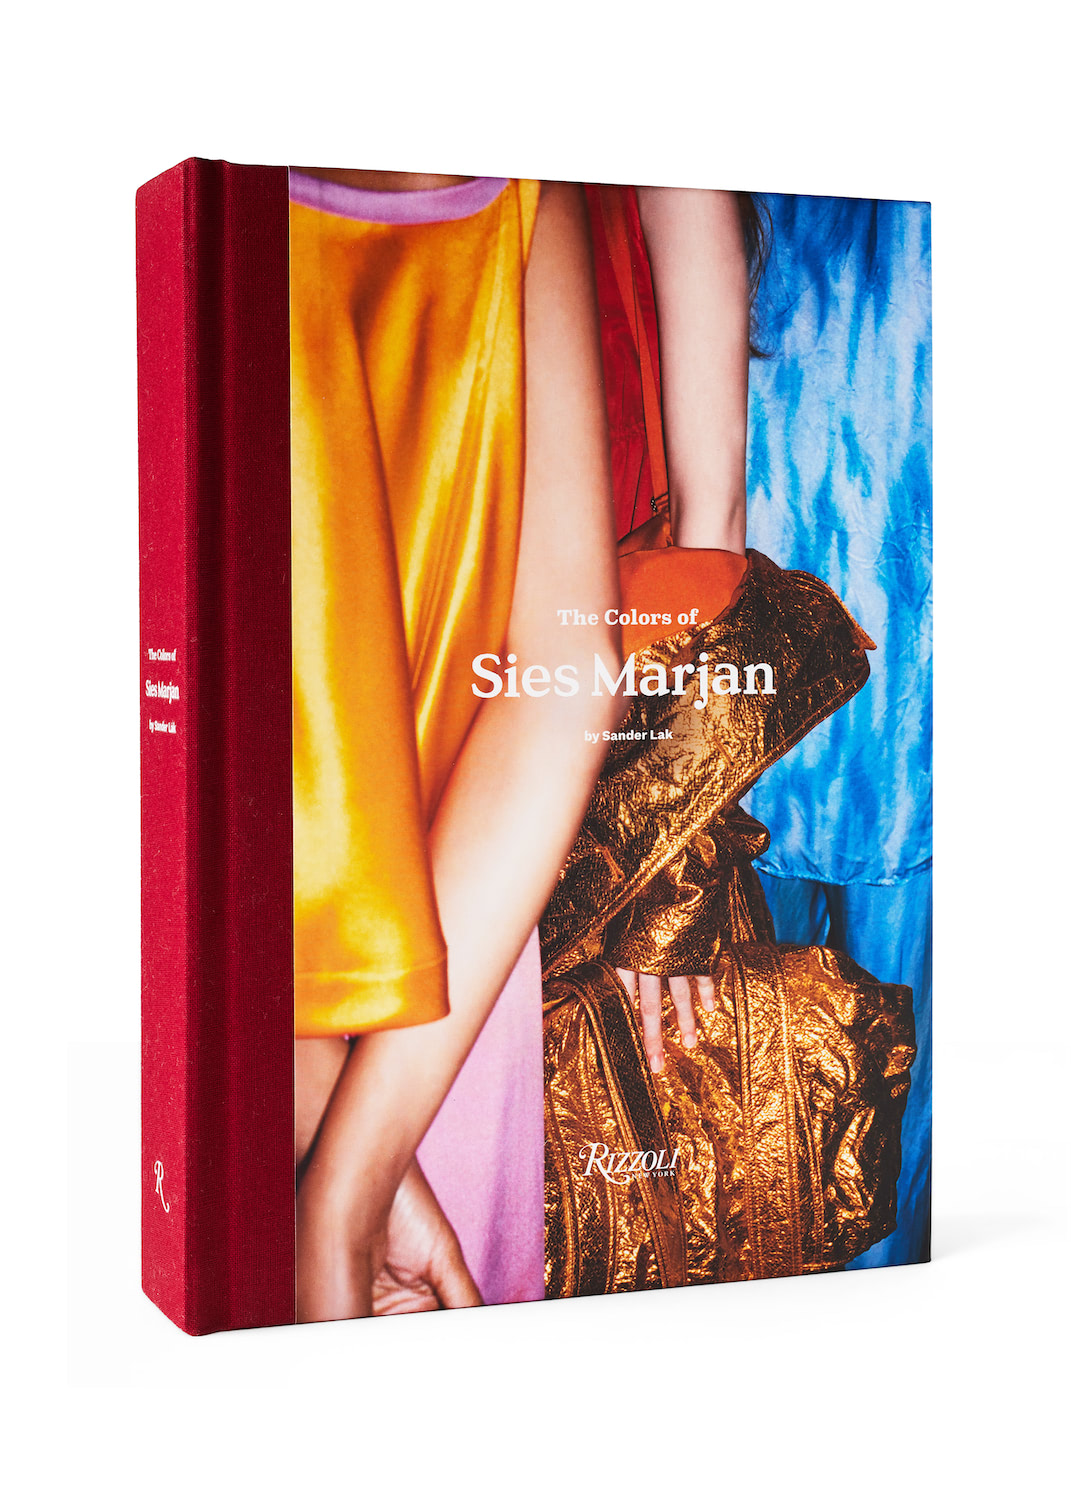 ‘The Colors of Sies Marjan’ book cover